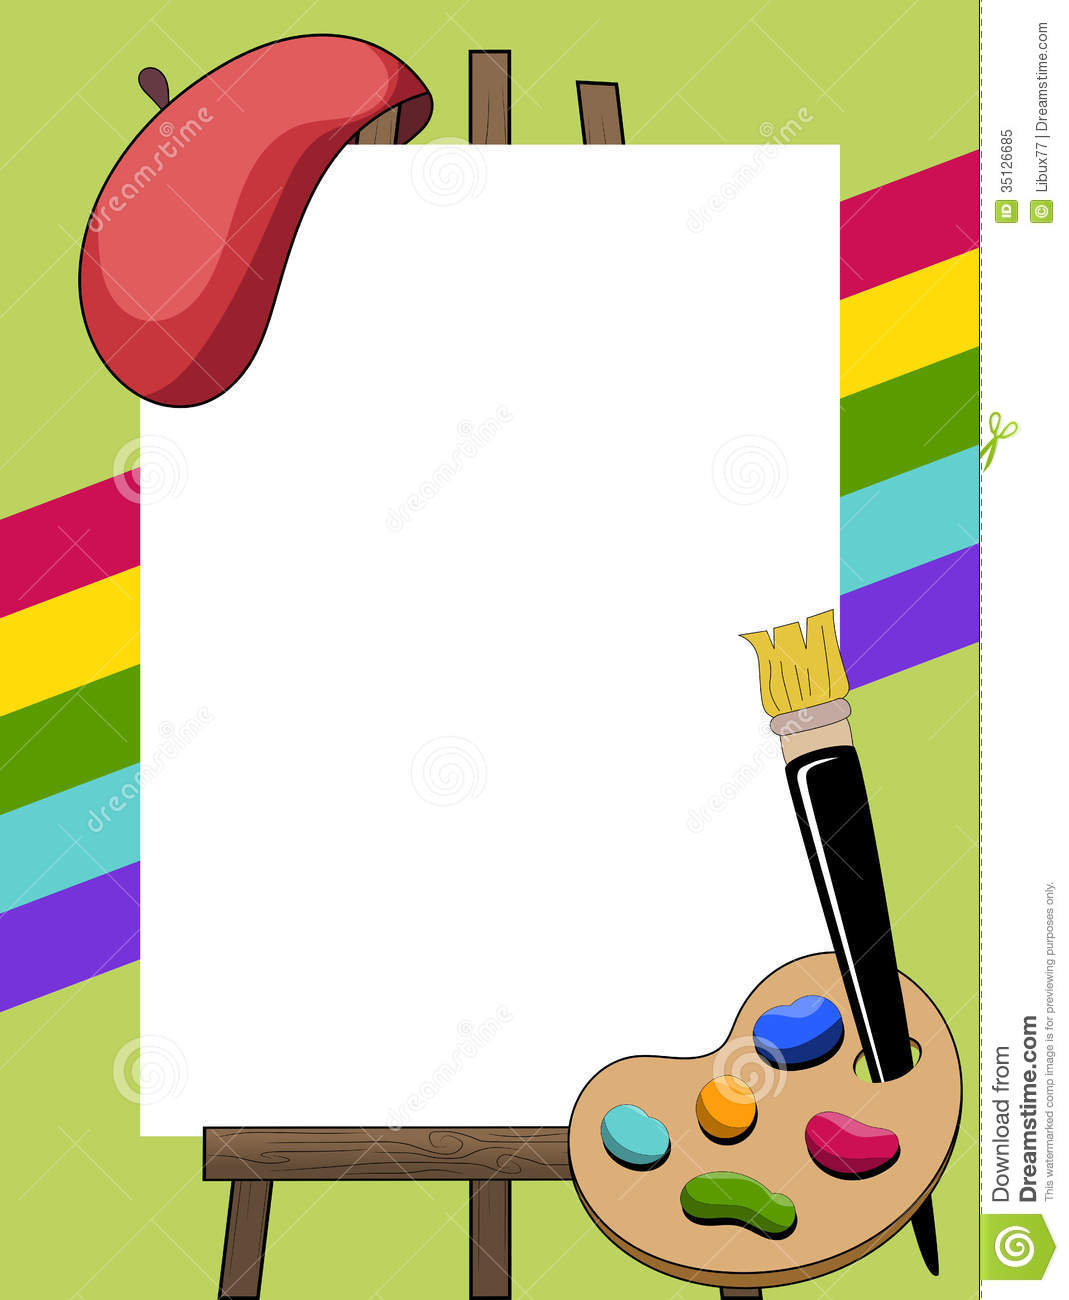 Painter Frame With Palette  Brush And Beret Arranged Around Art Easel